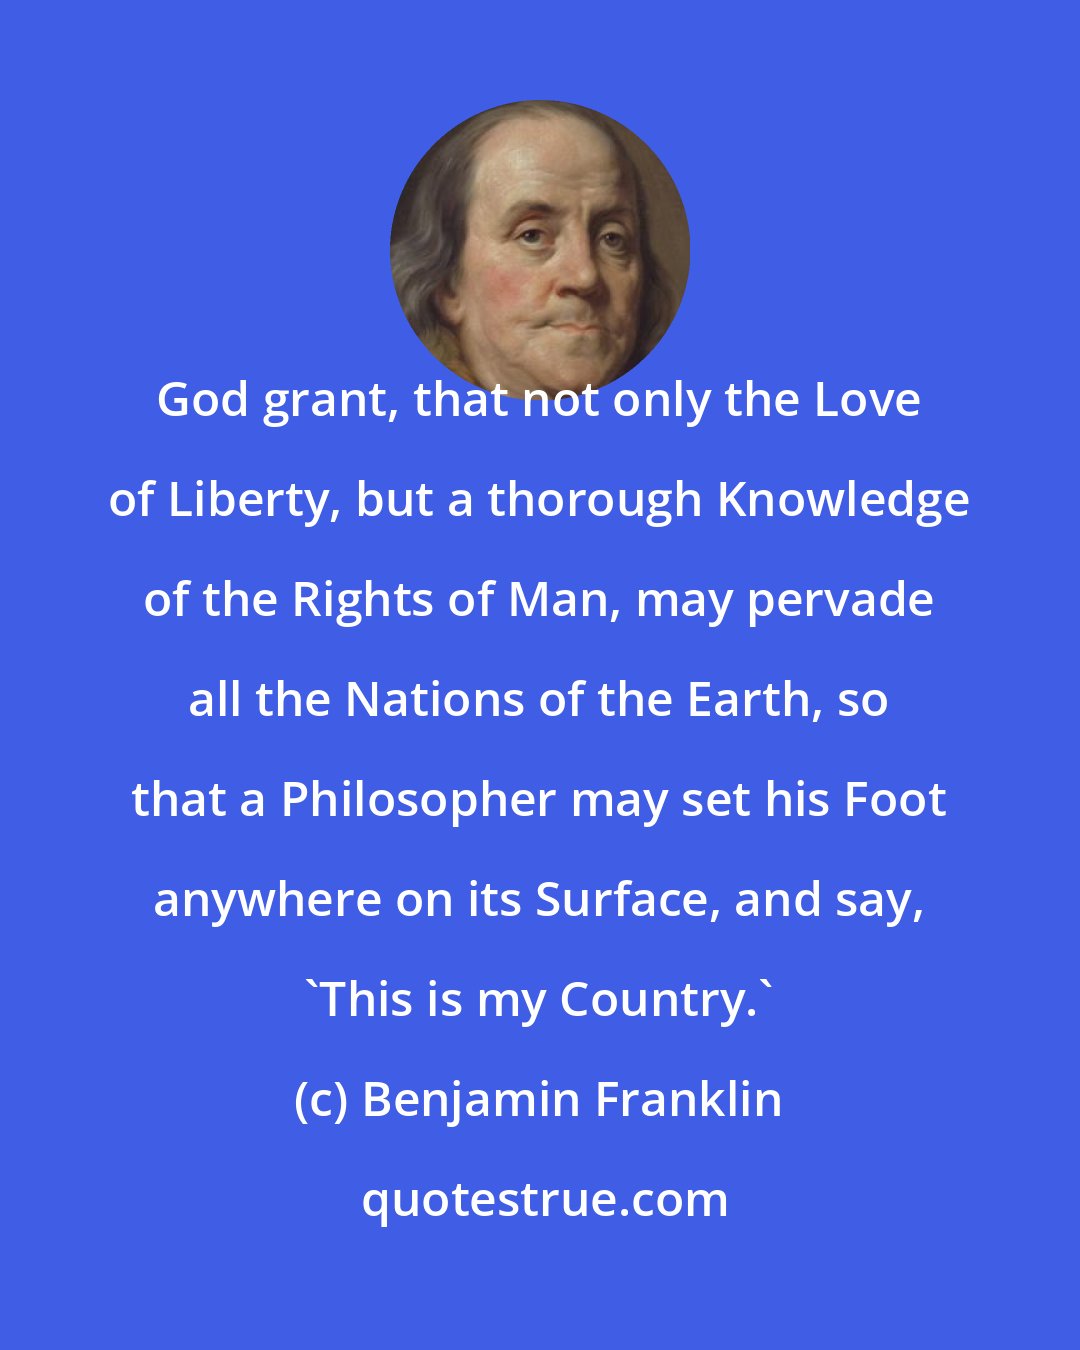 Benjamin Franklin: God grant, that not only the Love of Liberty, but a thorough Knowledge of the Rights of Man, may pervade all the Nations of the Earth, so that a Philosopher may set his Foot anywhere on its Surface, and say, 'This is my Country.'